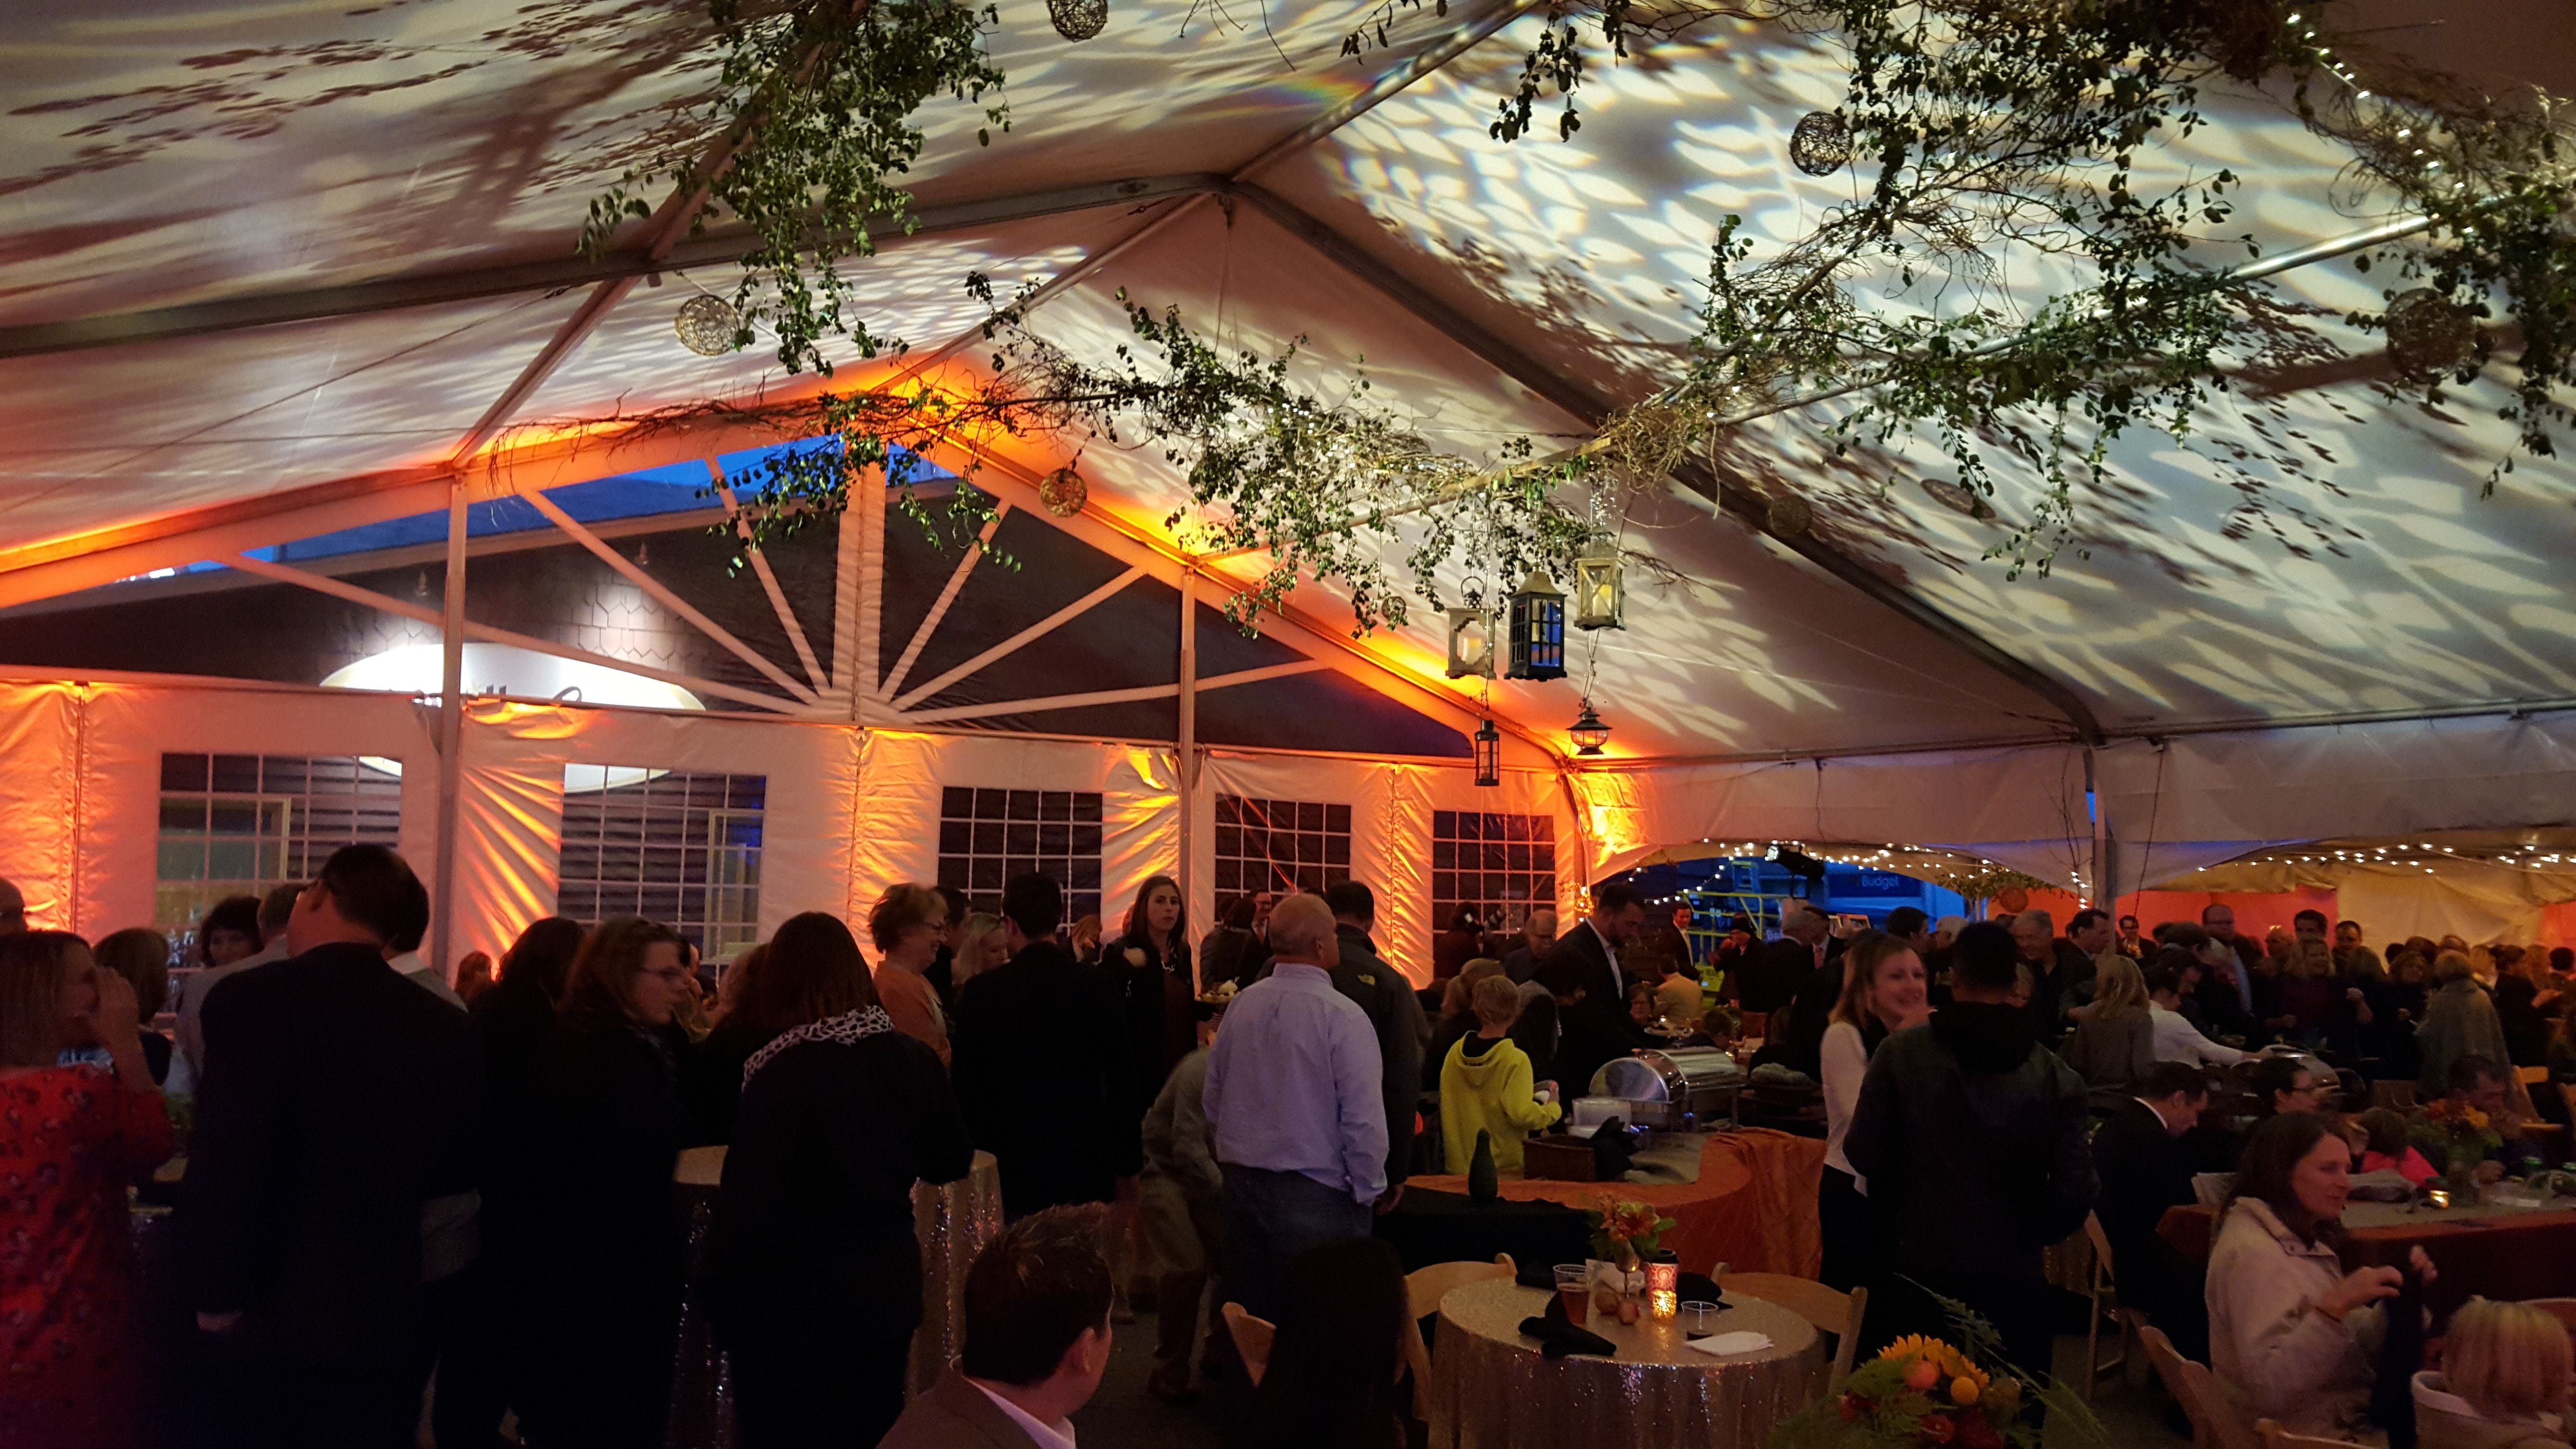 A spring themed wedding in a tent. Leaf gobos on the ceiling with orange up lighting.